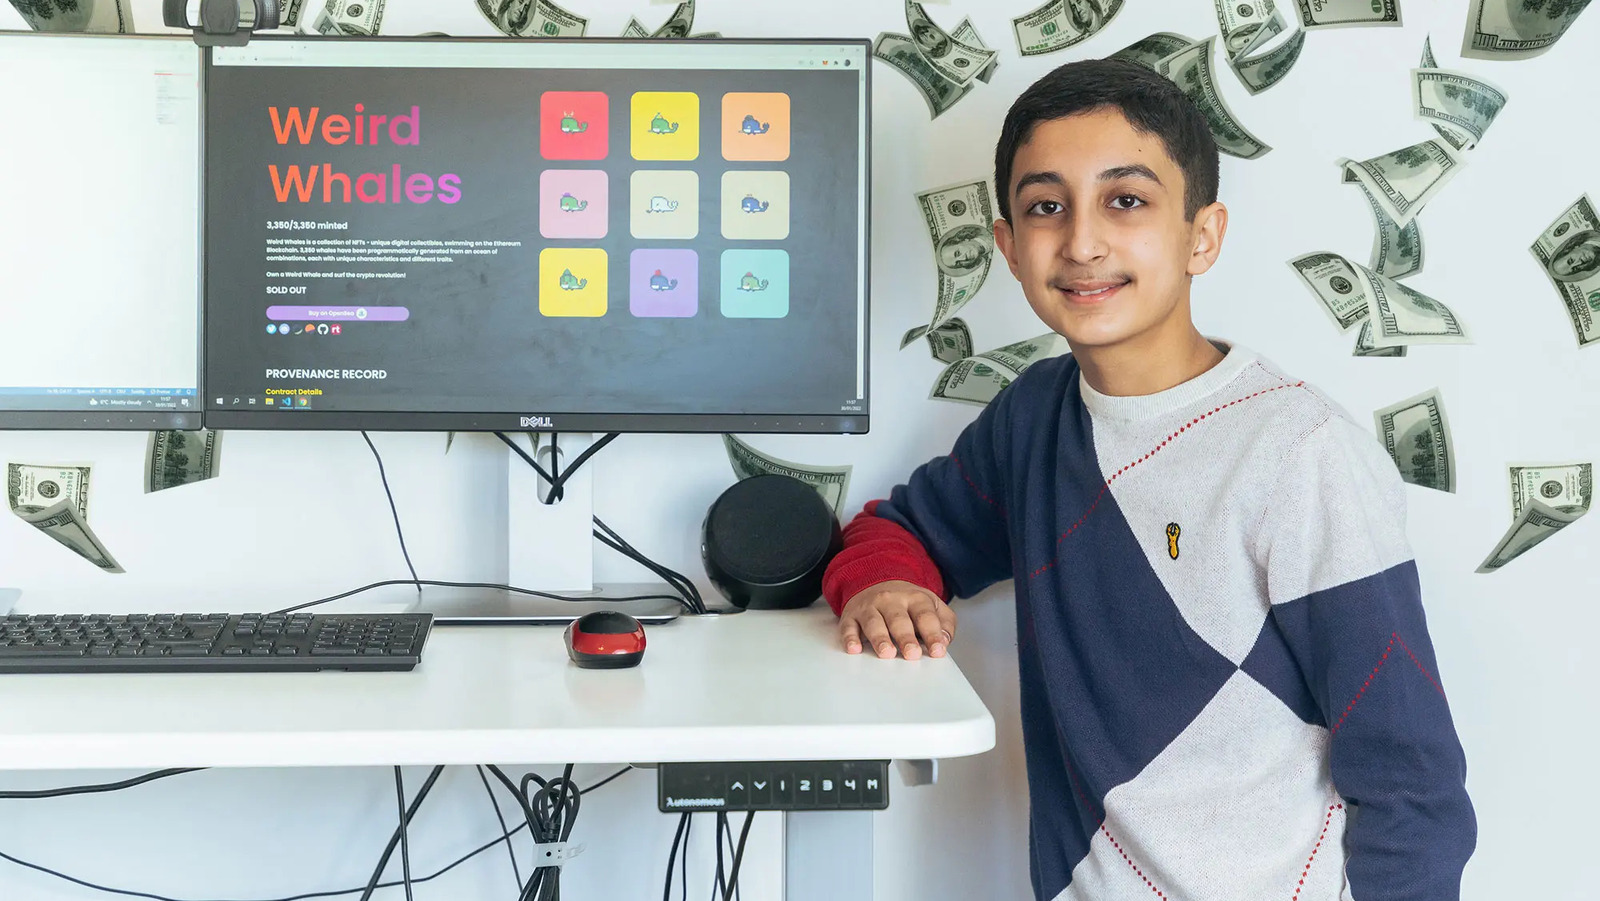 Whatever Happened To The 12-Year-Old NFT Millionaire? - SlashGear